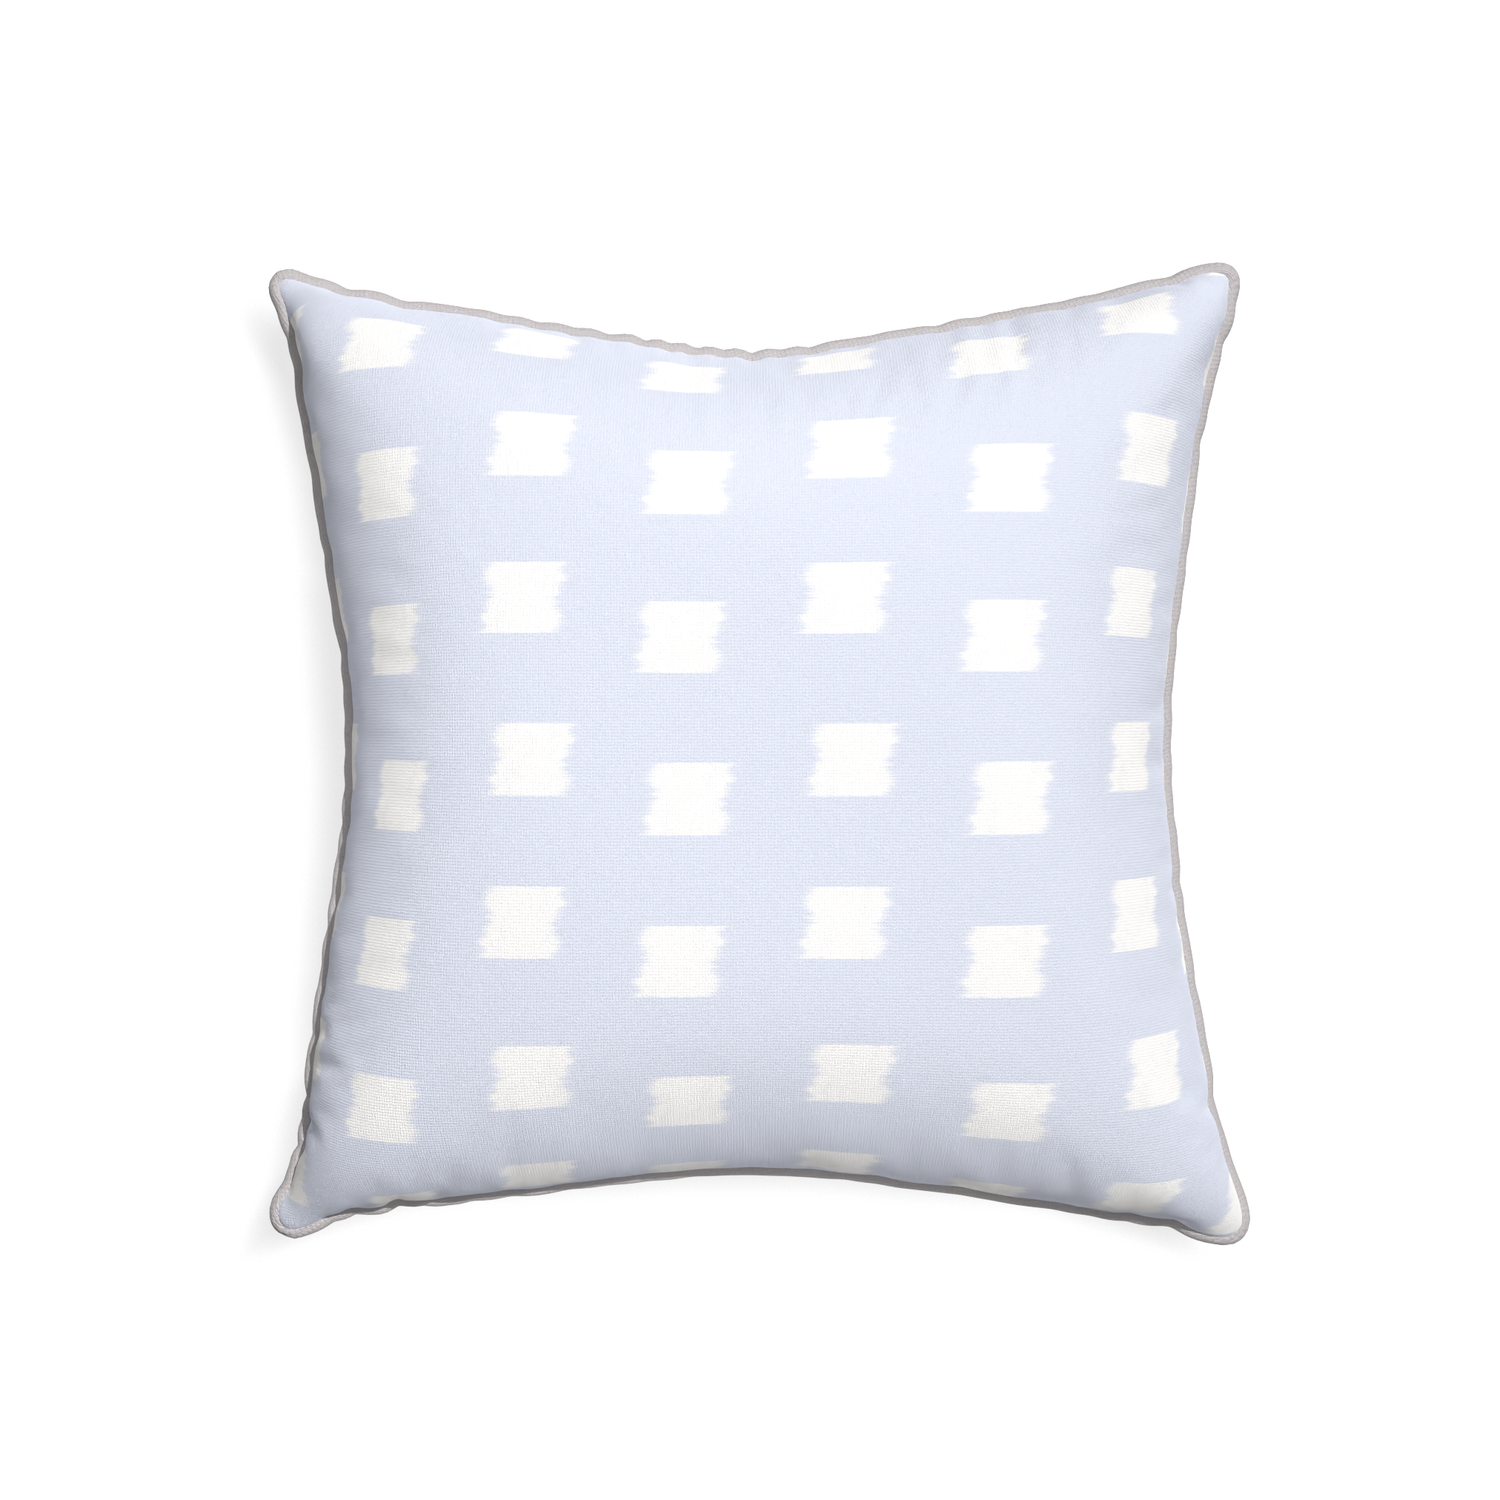 22-square denton custom pillow with pebble piping on white background